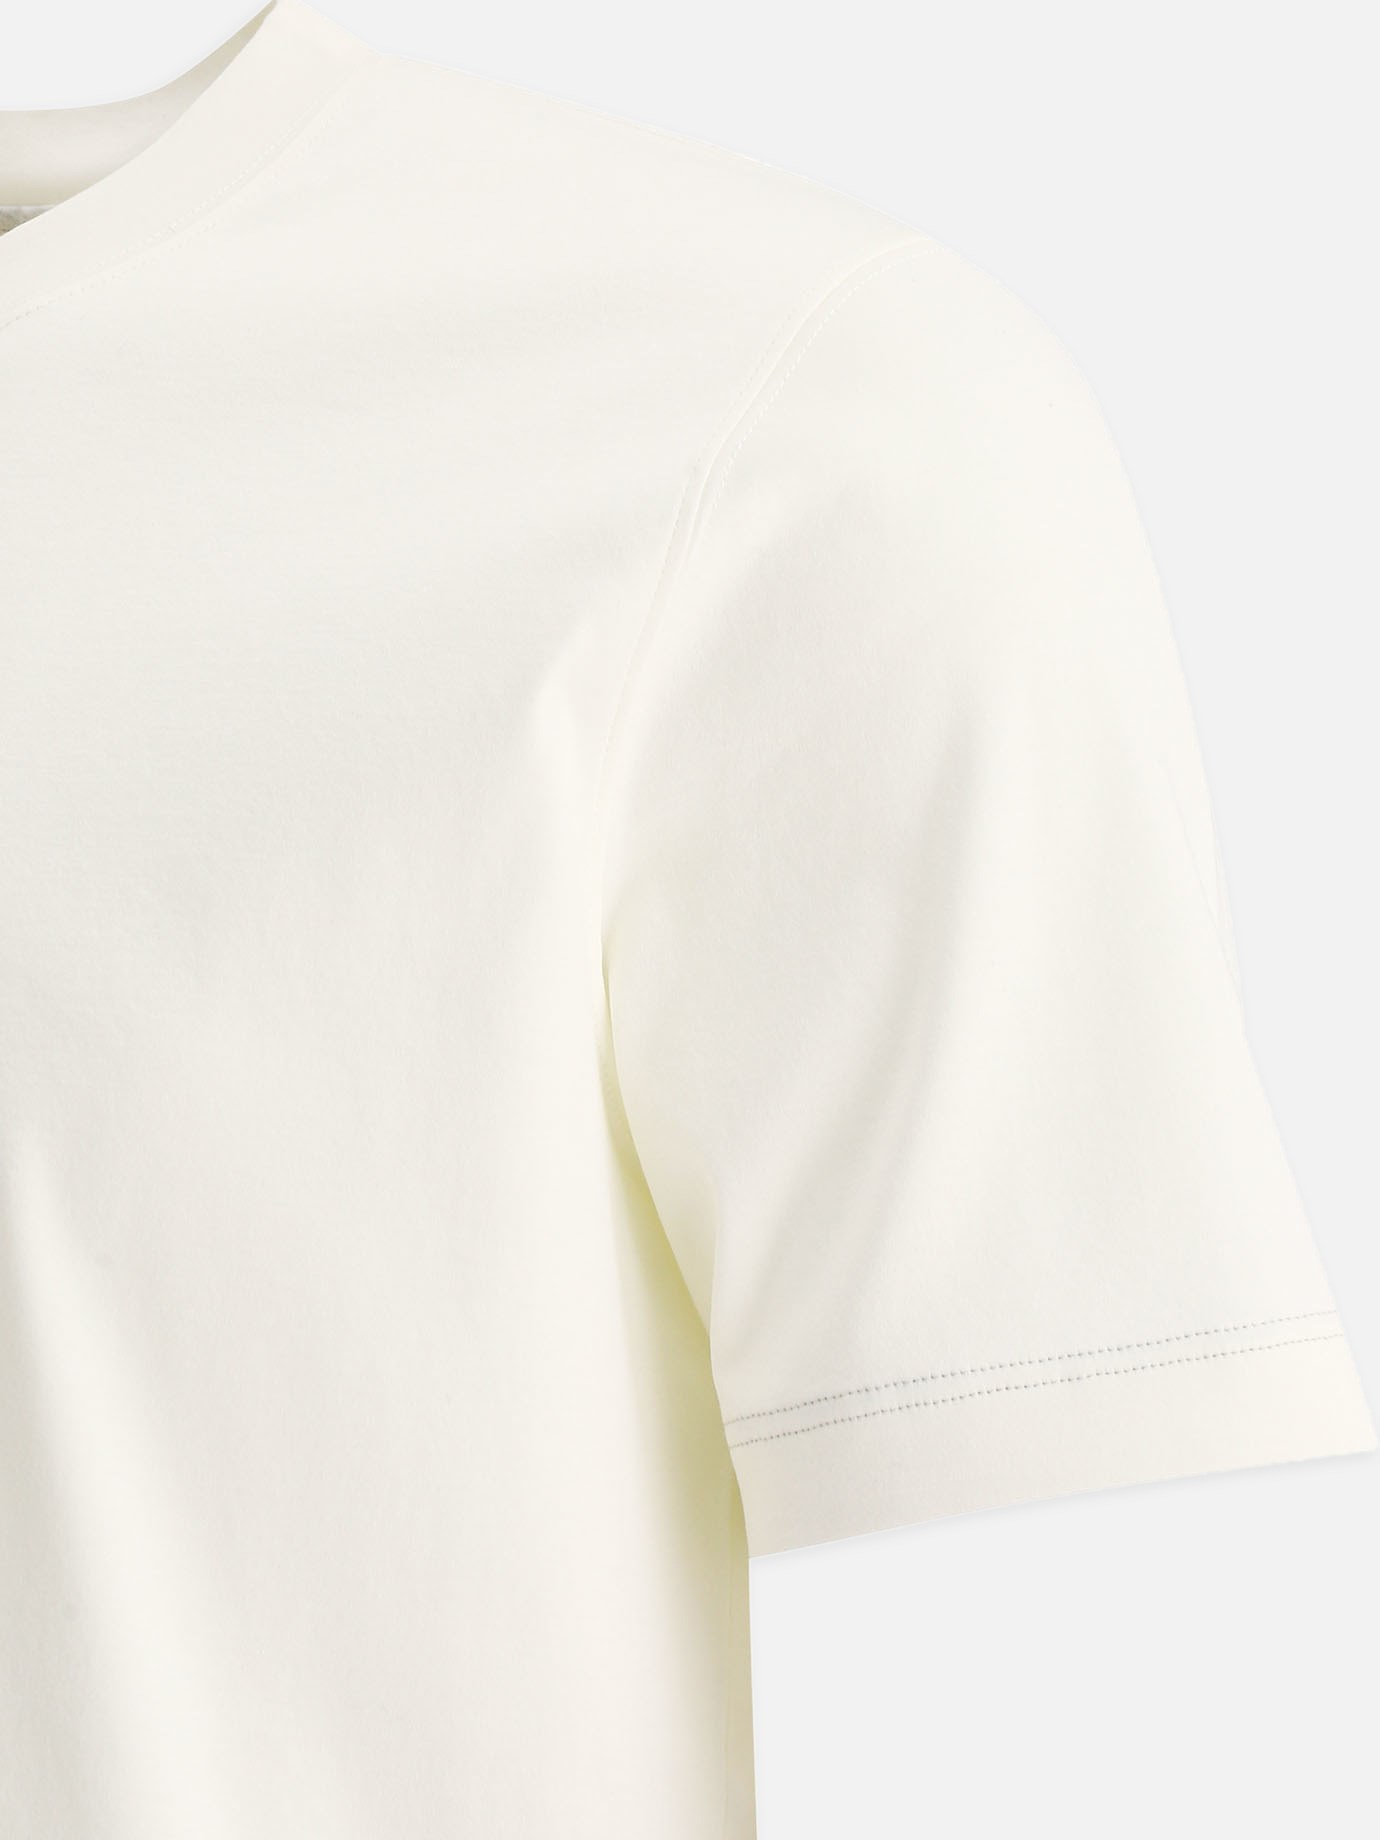  Simplicity in Elegance  t-shirt by Brunello Cucinelli